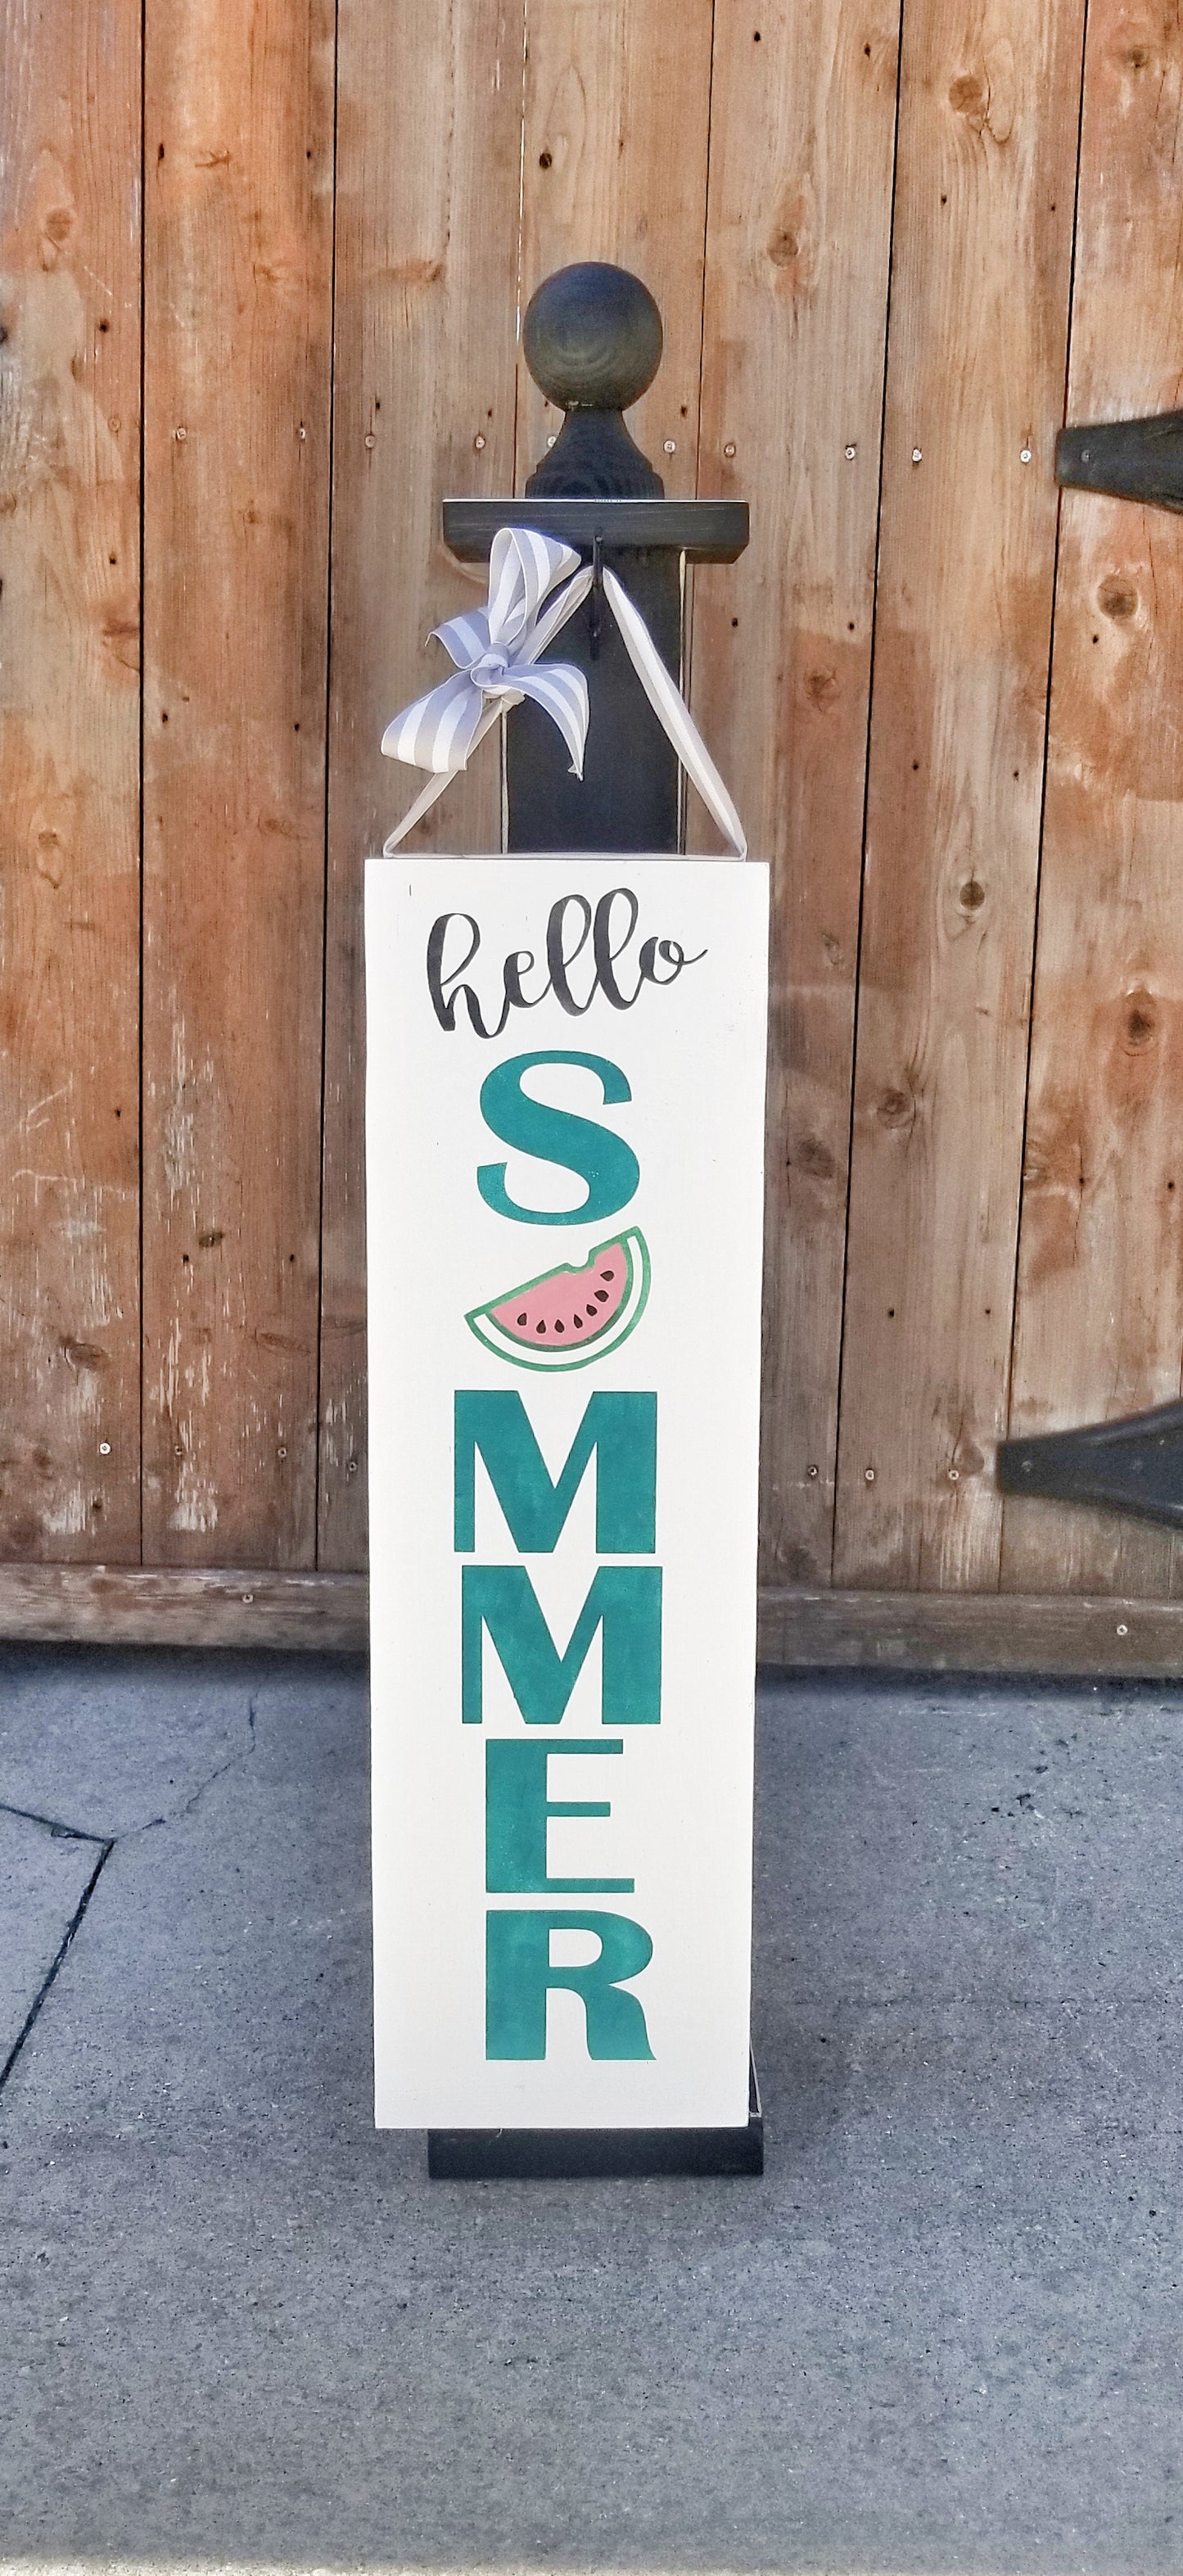 Watermelon Summertime Sign and Hanging Post